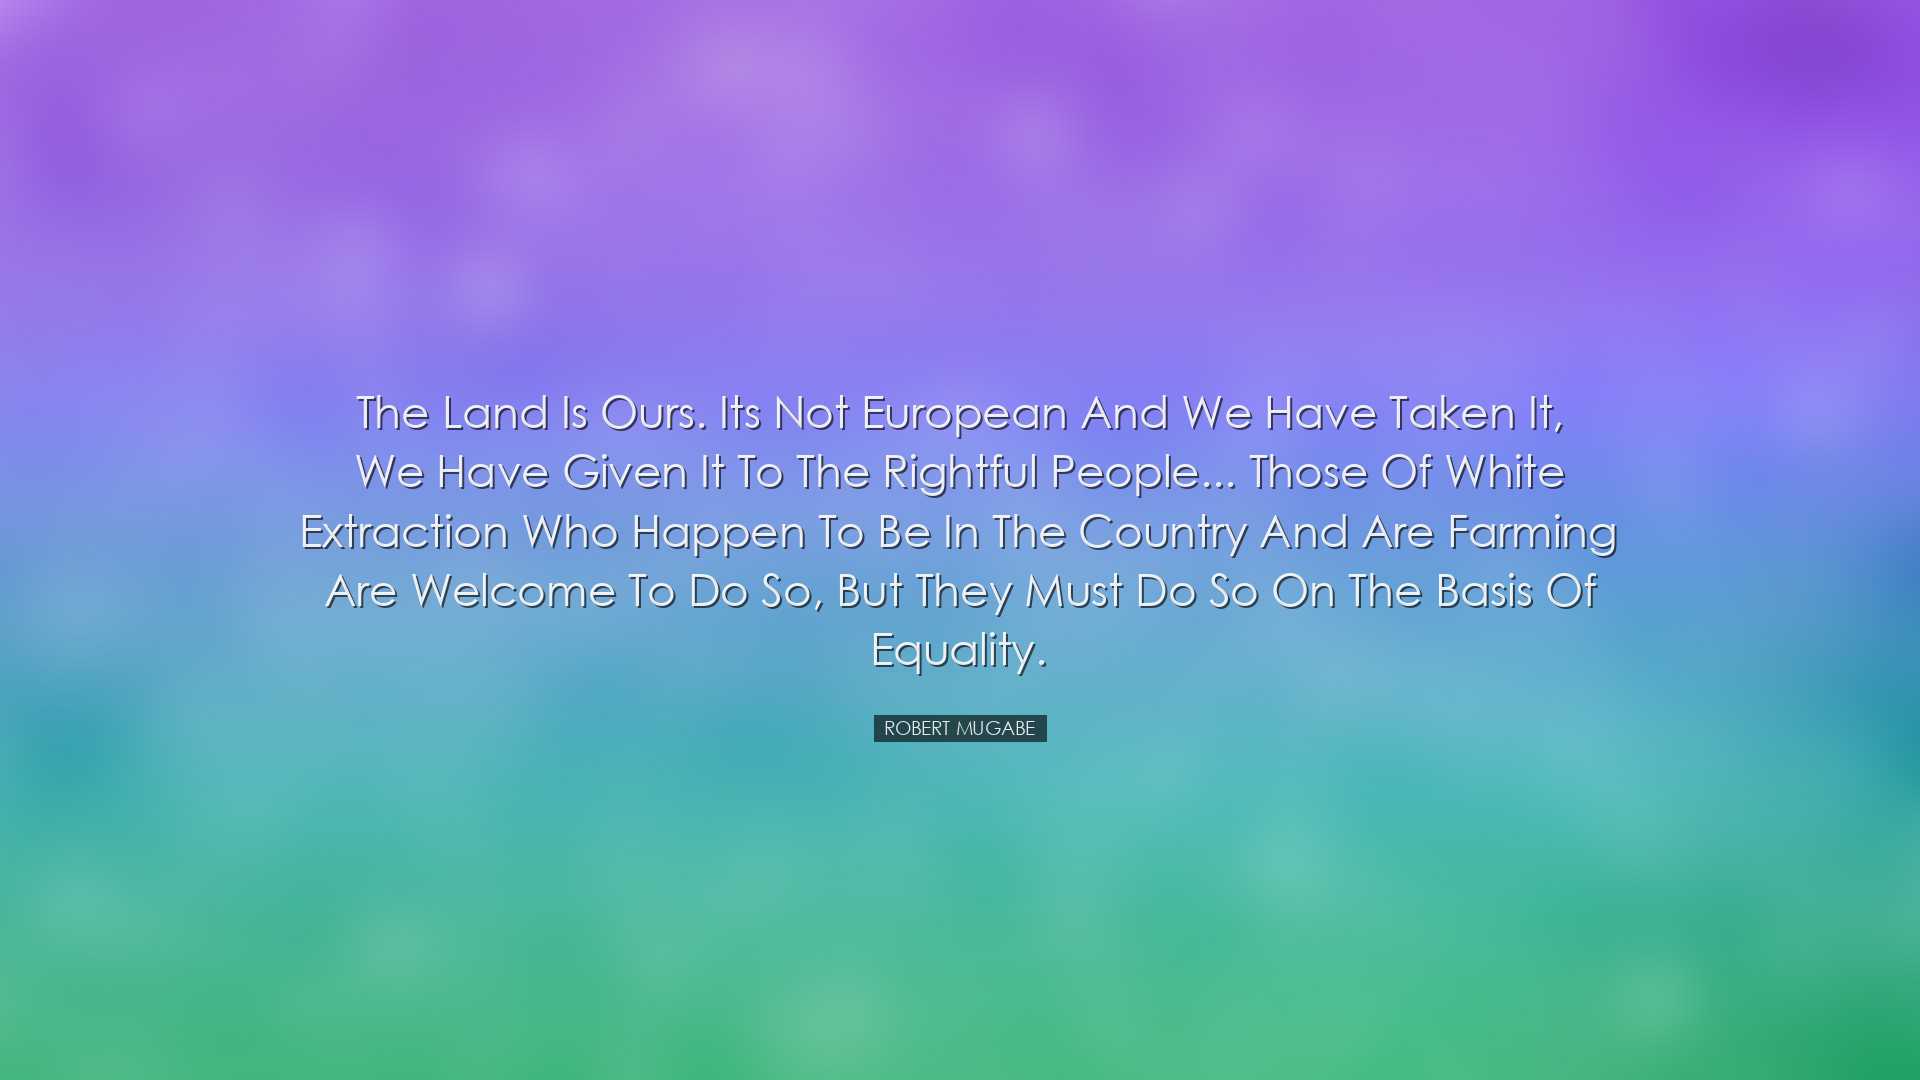 The land is ours. Its not European and we have taken it, we have g